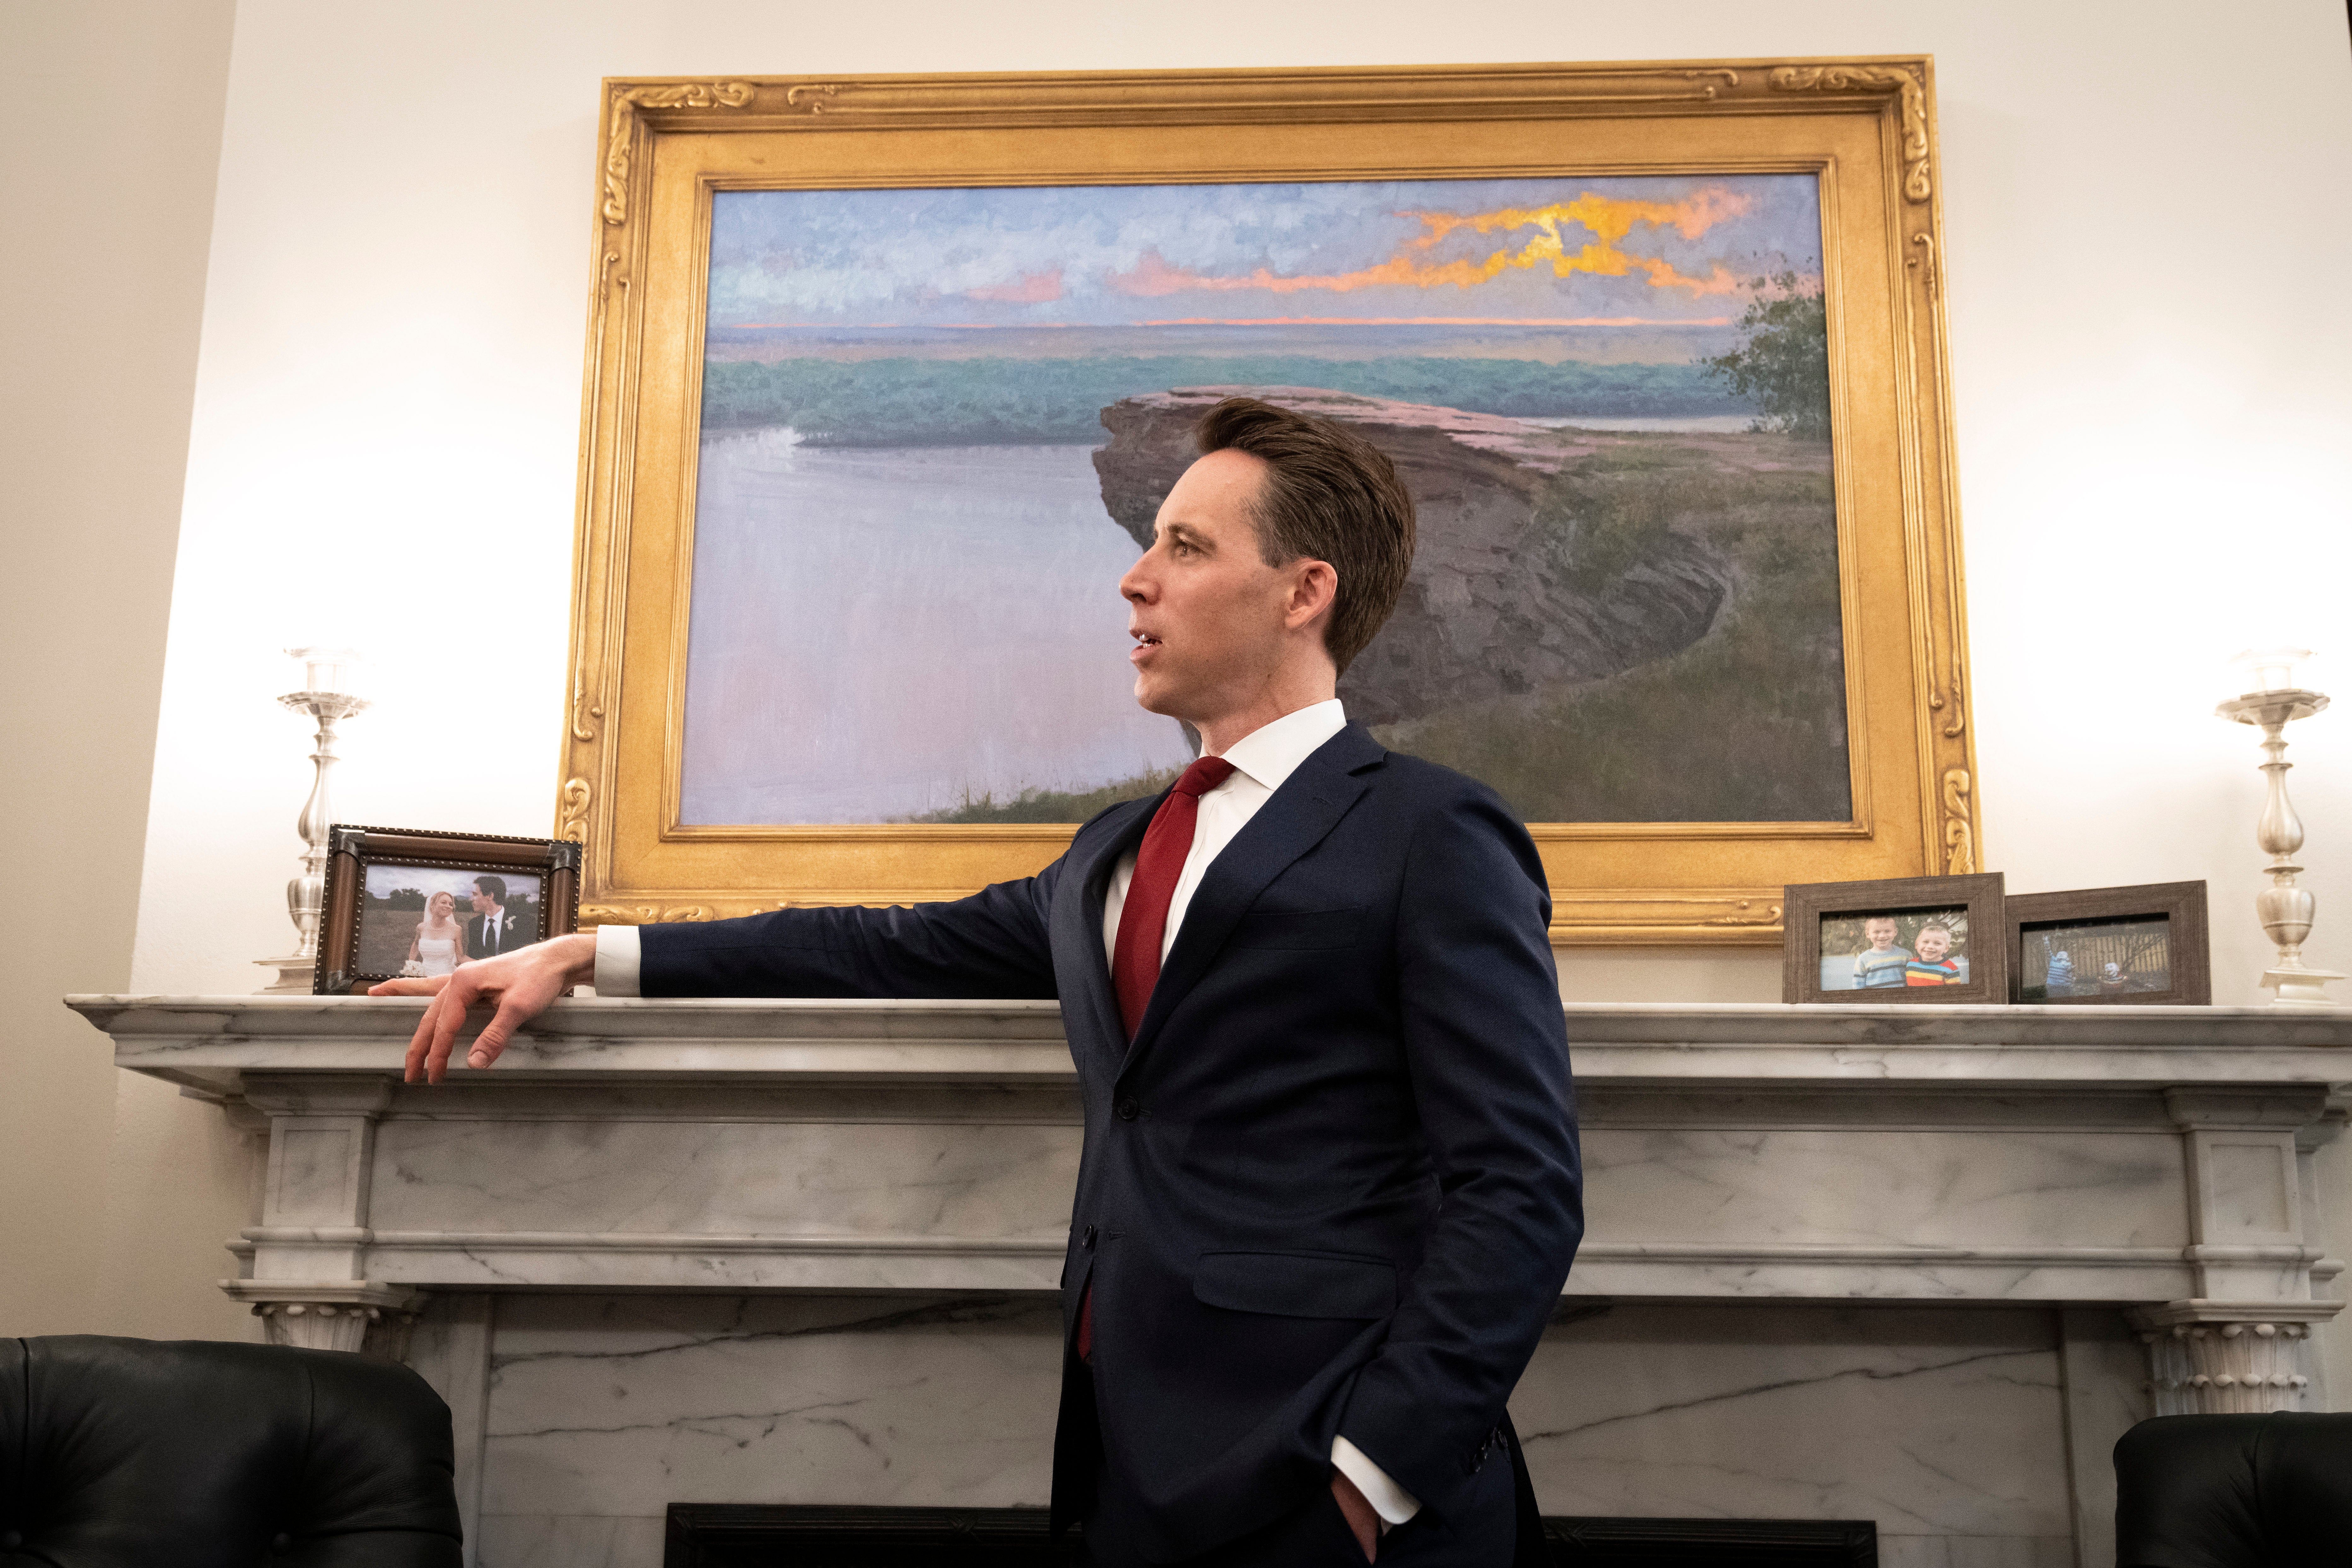 WASHINGTON, DC - MARCH 9: Sen. Josh Hawley (R-MO) waits for Supreme Court Nominee Ketanji Brown Jackson to arrive at his office on Capitol Hill March 9, 2022 in Washington, DC. Supreme Court nominee Ketanji Brown Jackson continued to meet with Senate members on Capitol Hill ahead of her confirmation hearings. (Photo by Drew Angerer/Getty Images)